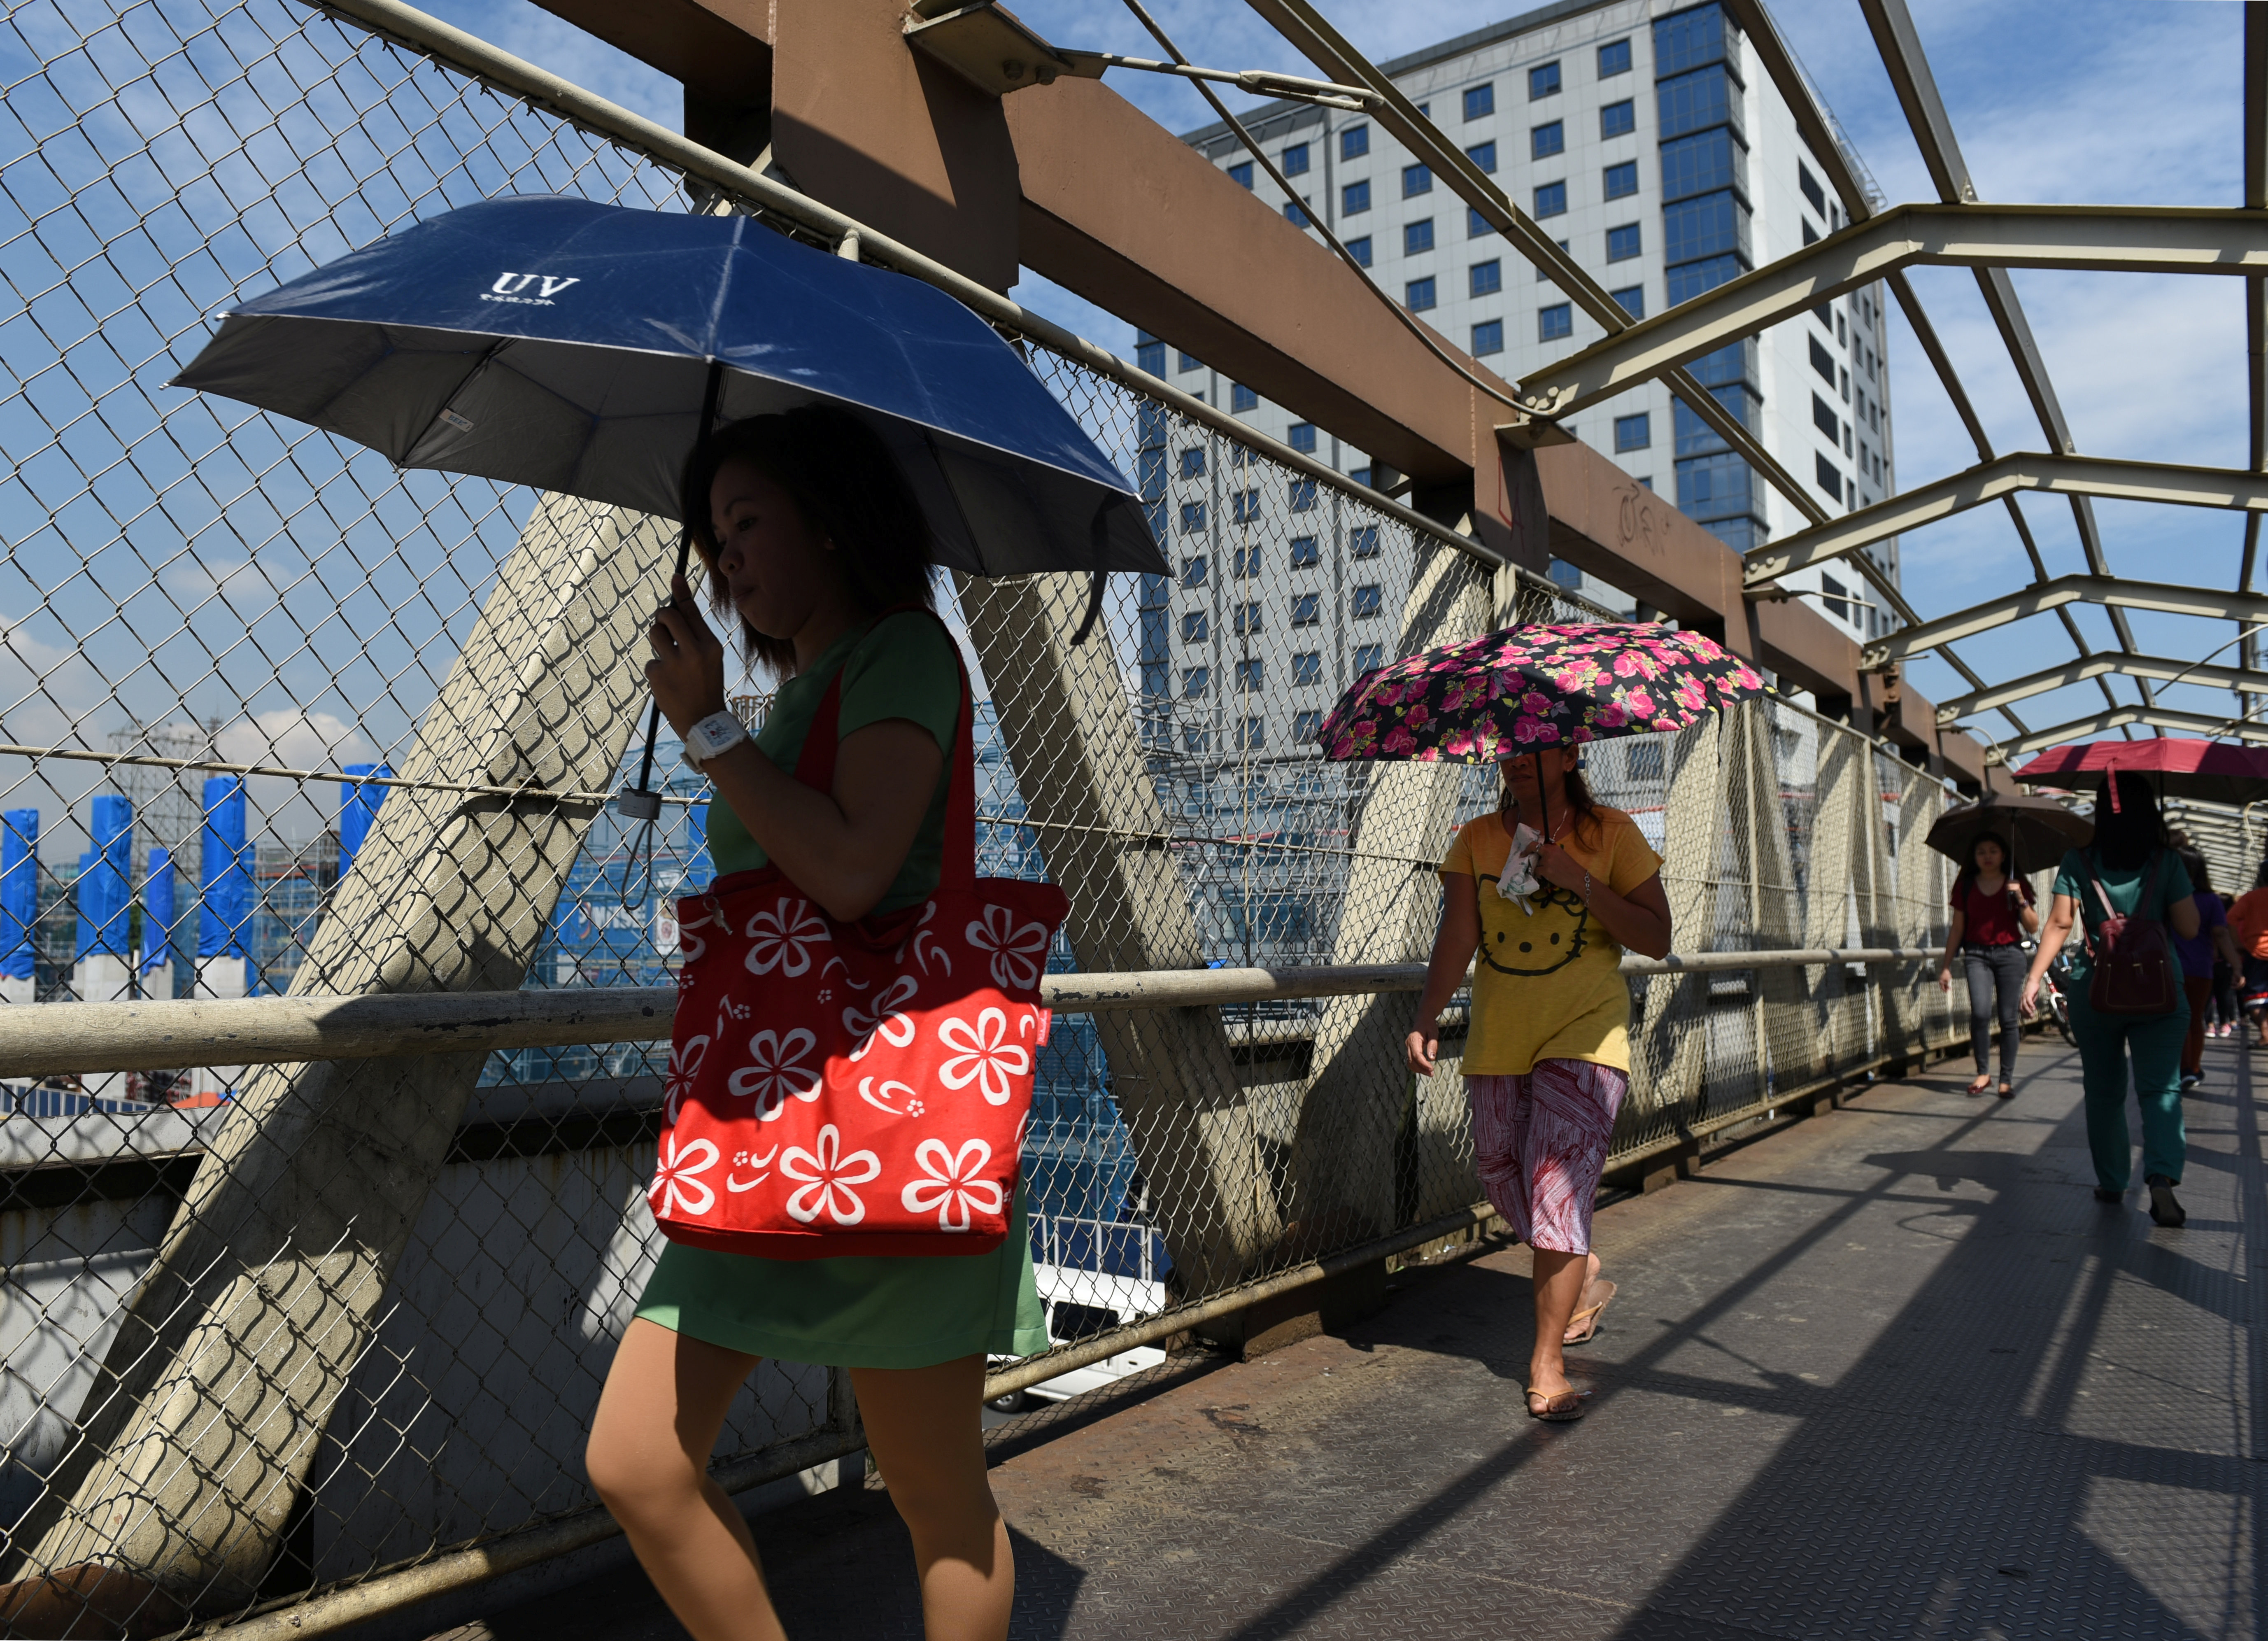 Commuters pass through an elevated pedestrian walkway on Commonwealth Avenue